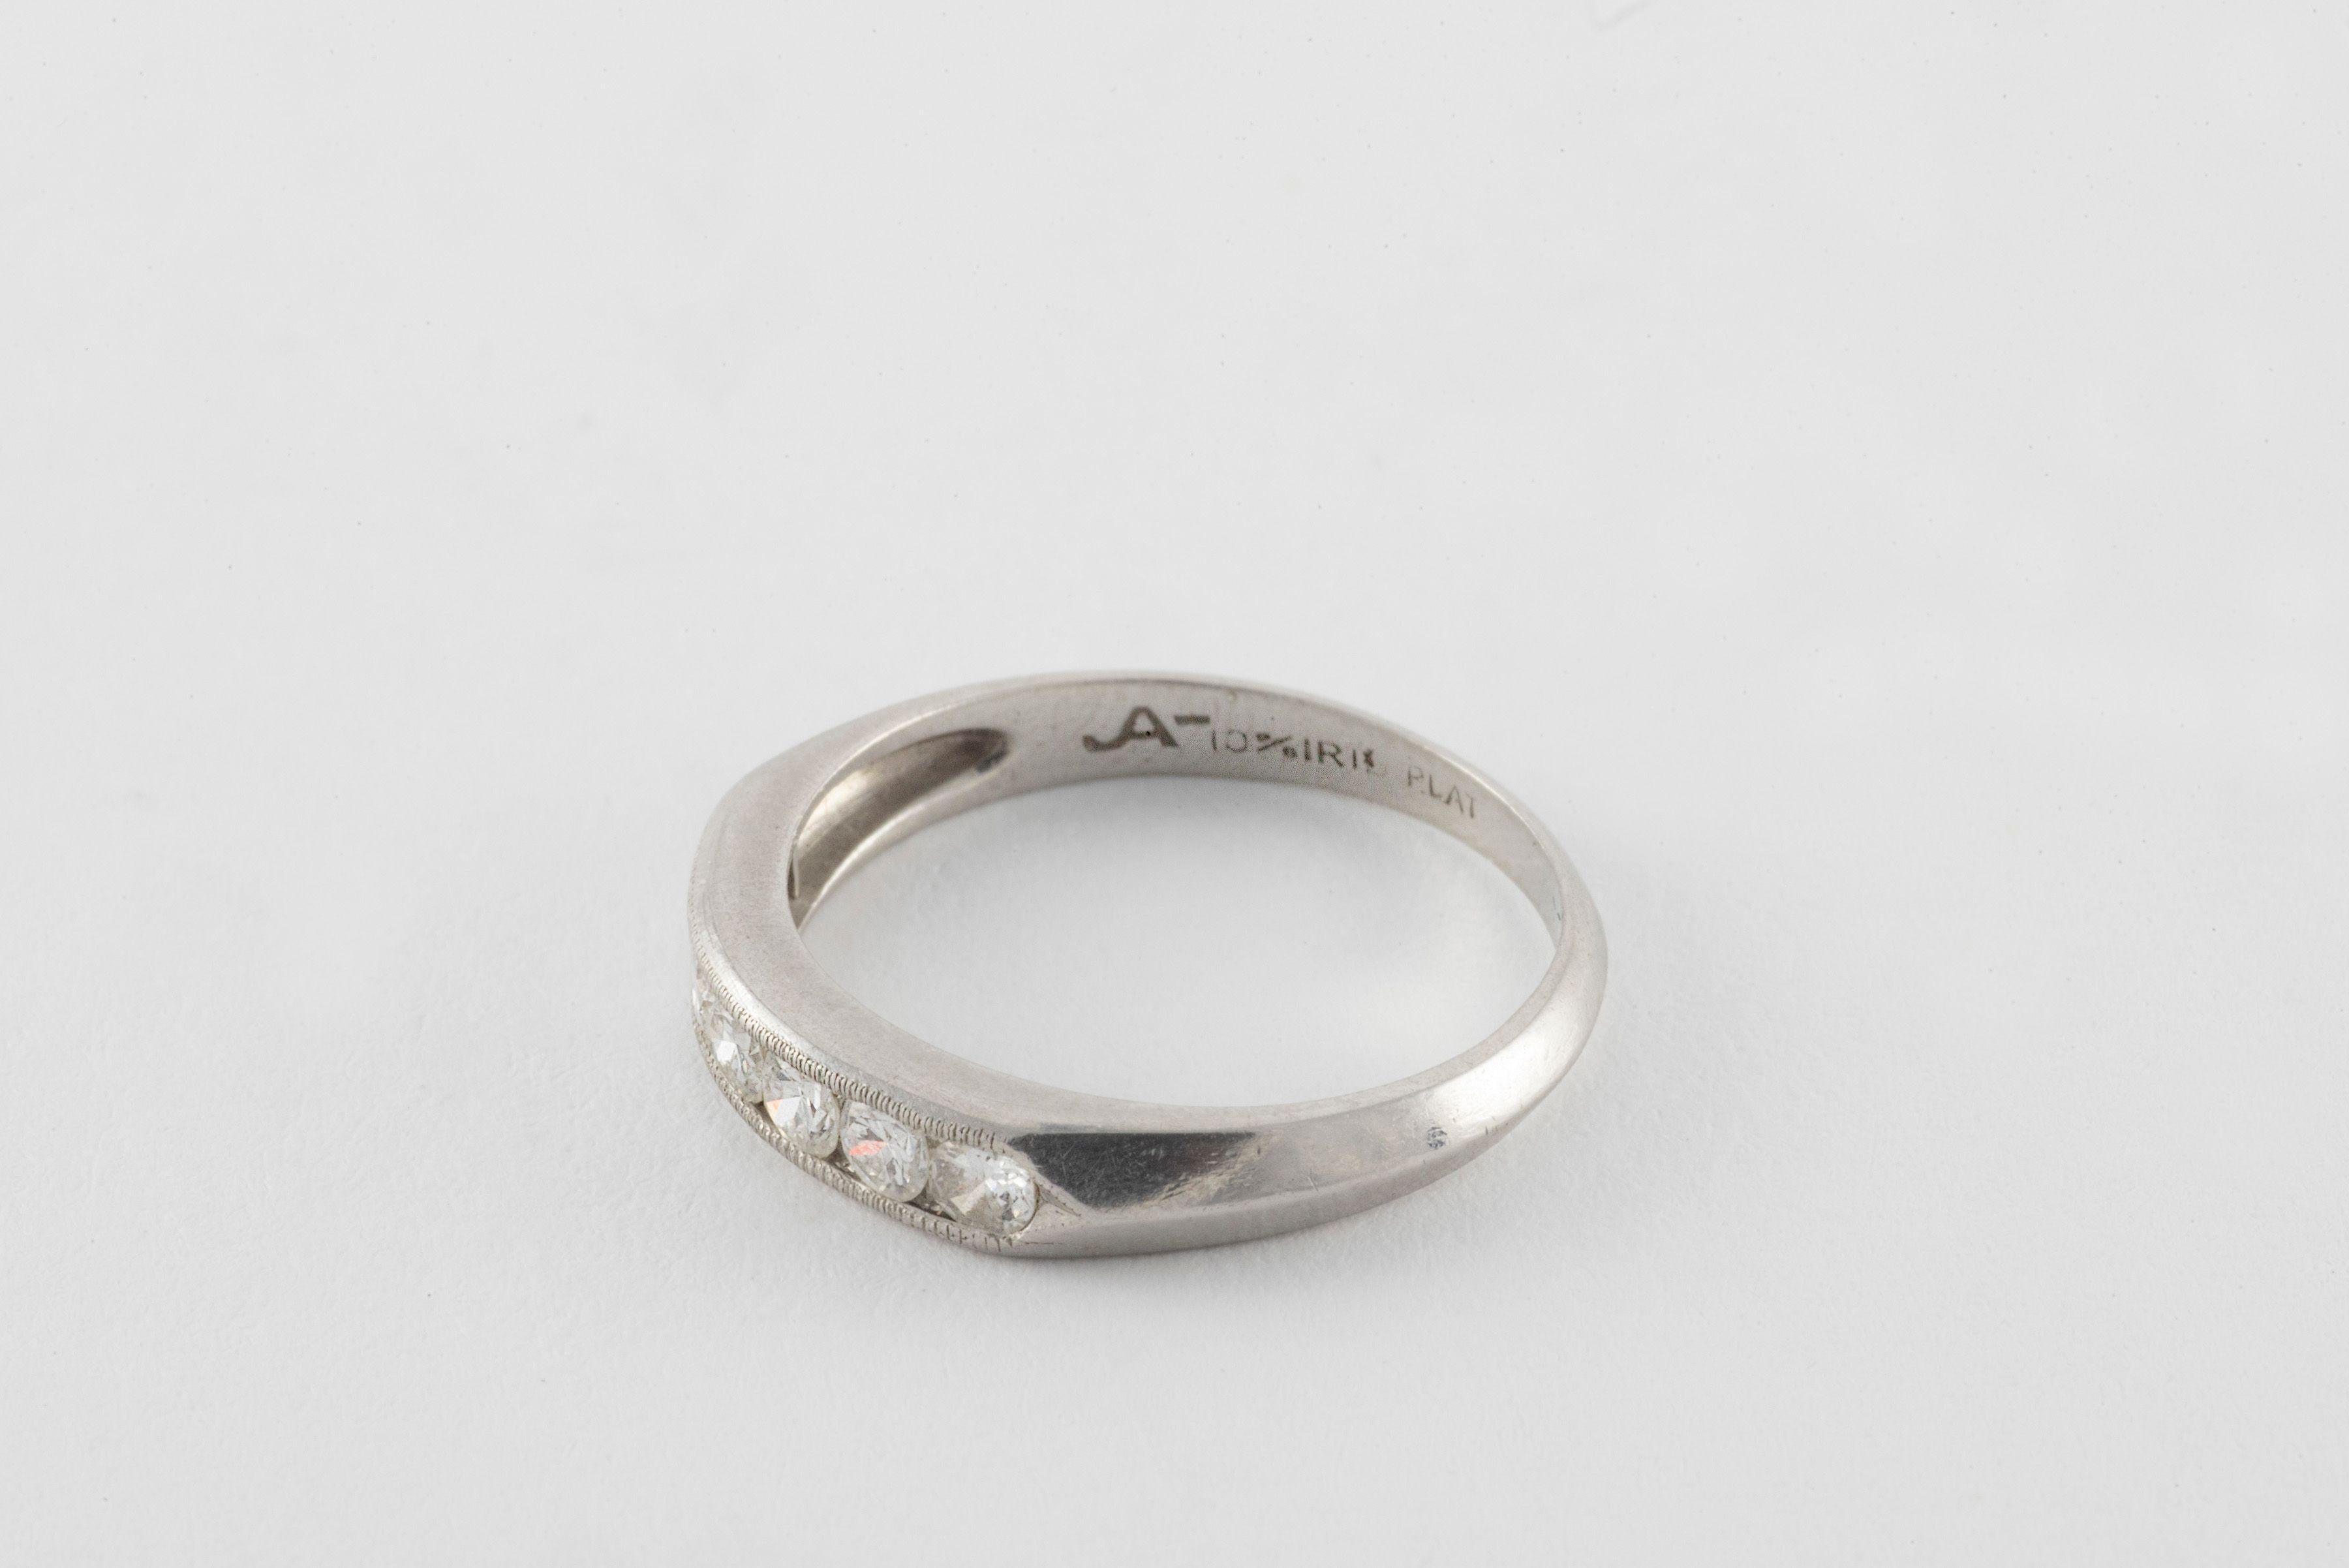 Seven sparkling Old European cut diamonds totaling approximately 0.35 carats, F color, VS clarity, bordered by delicate millegraining line the top of this antique wedding band fashioned from platinum. 